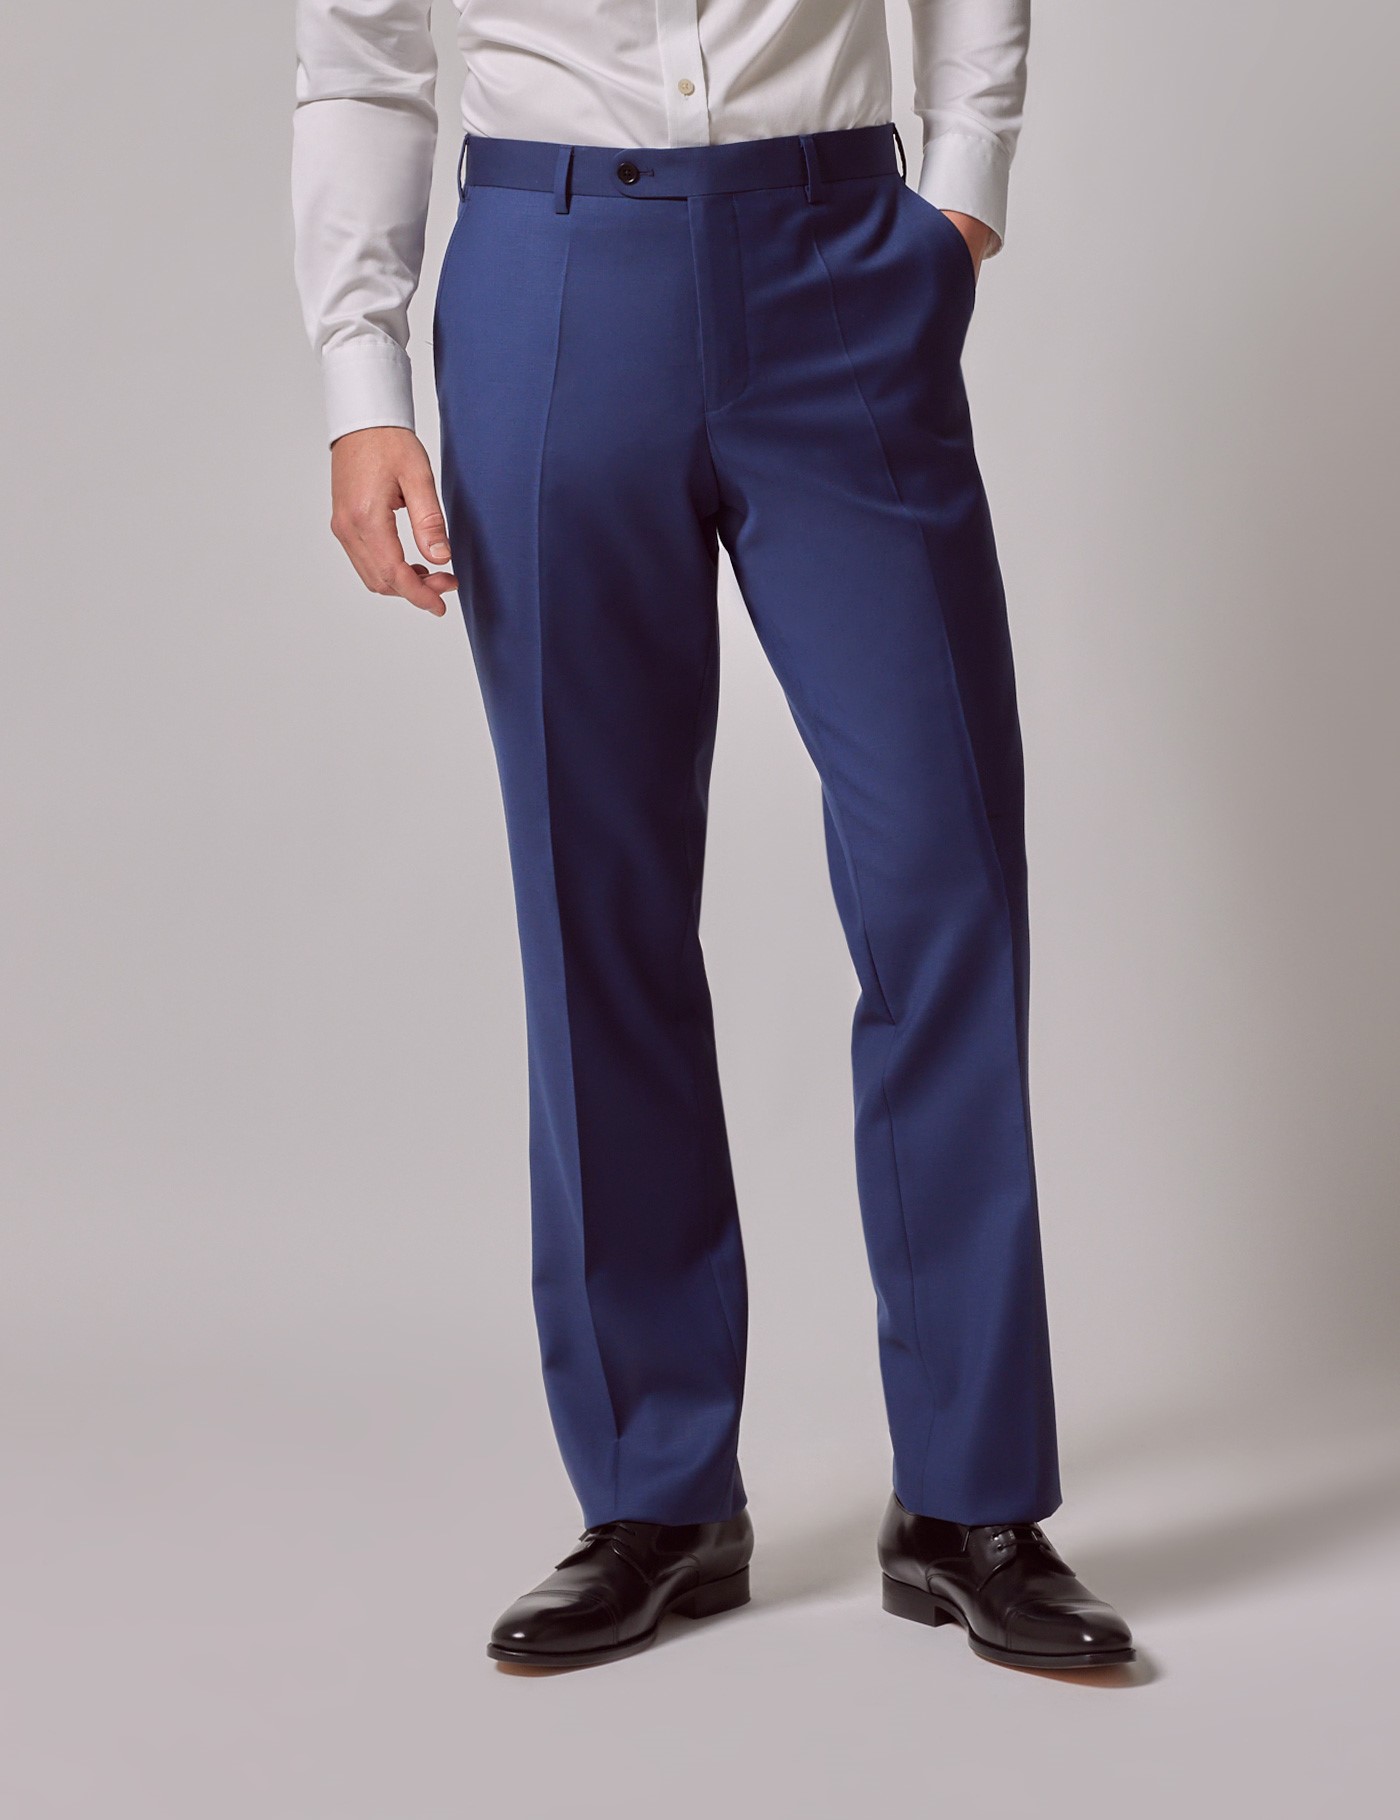 Royal Blue Formal and casual Pant online for men | Beyours